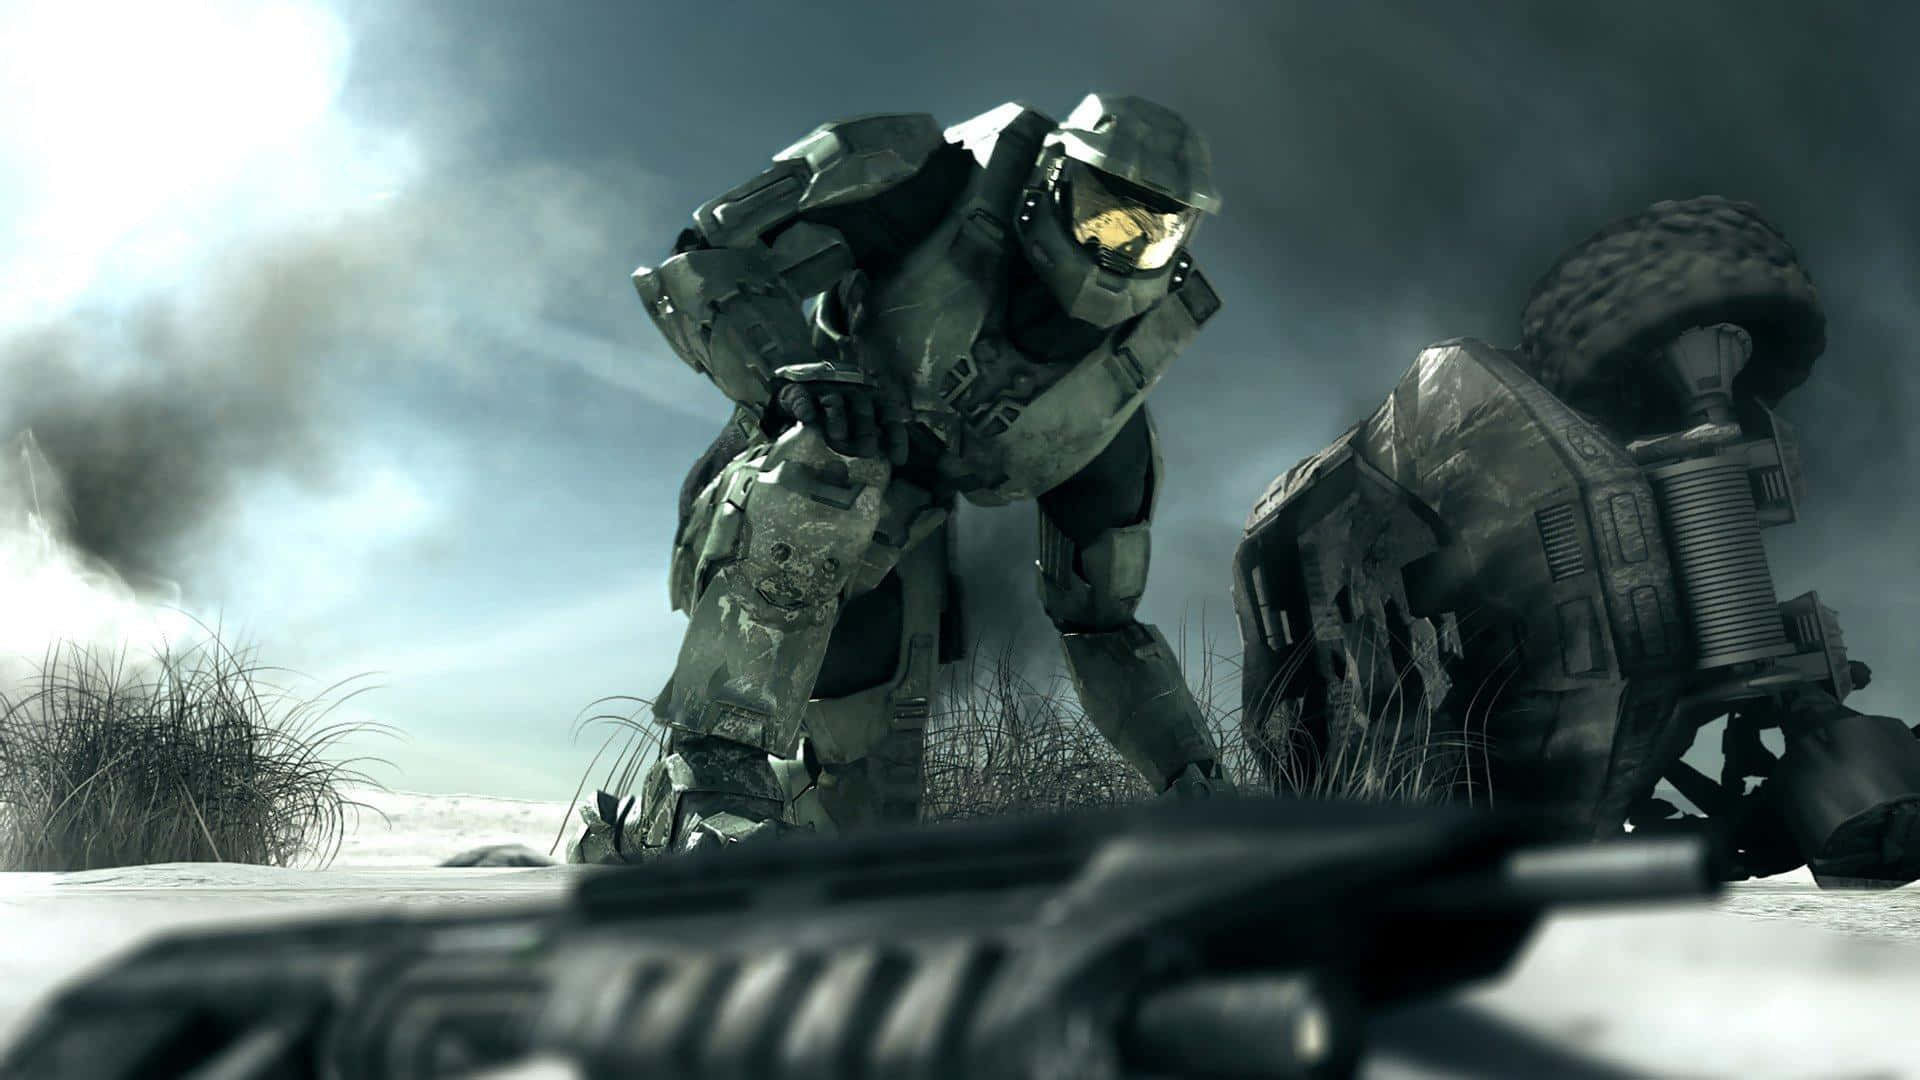 Intense Combat in the World of Halo Wallpaper